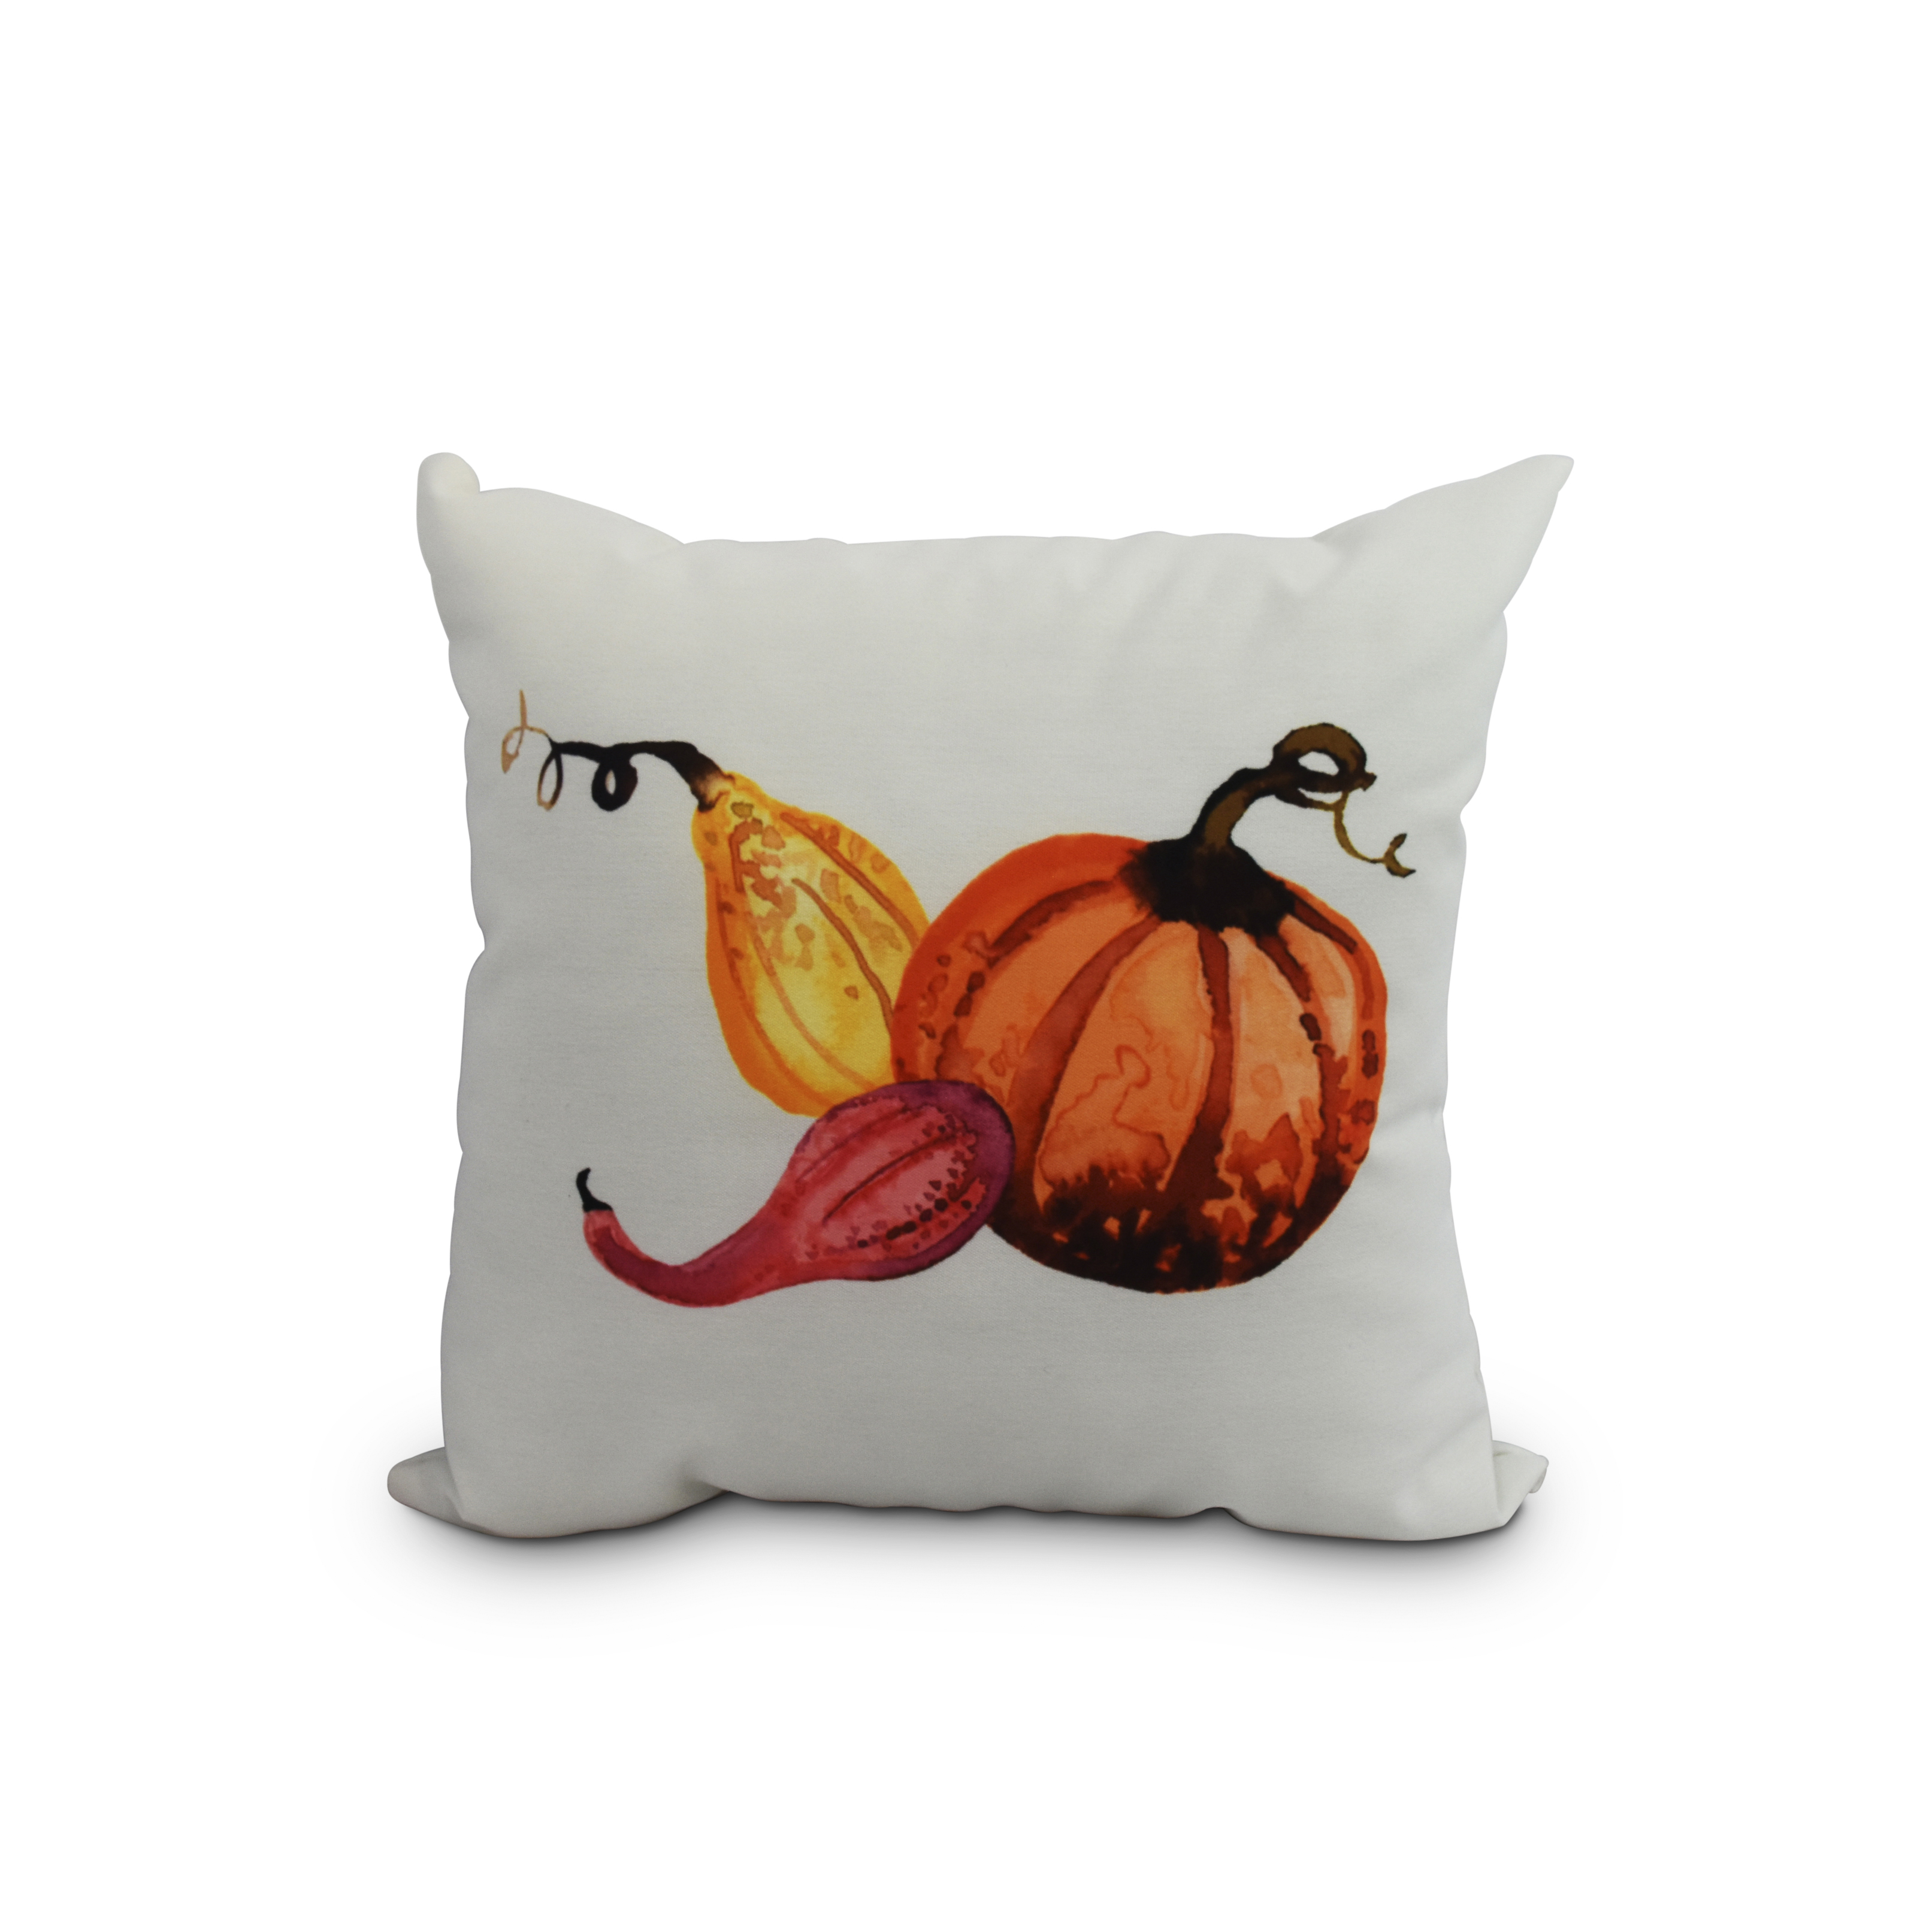 Simply Daisy, 18" x 18"Gourd Pile Cream Fall Print Outdoor Decorative Throw Pillow - image 1 of 2